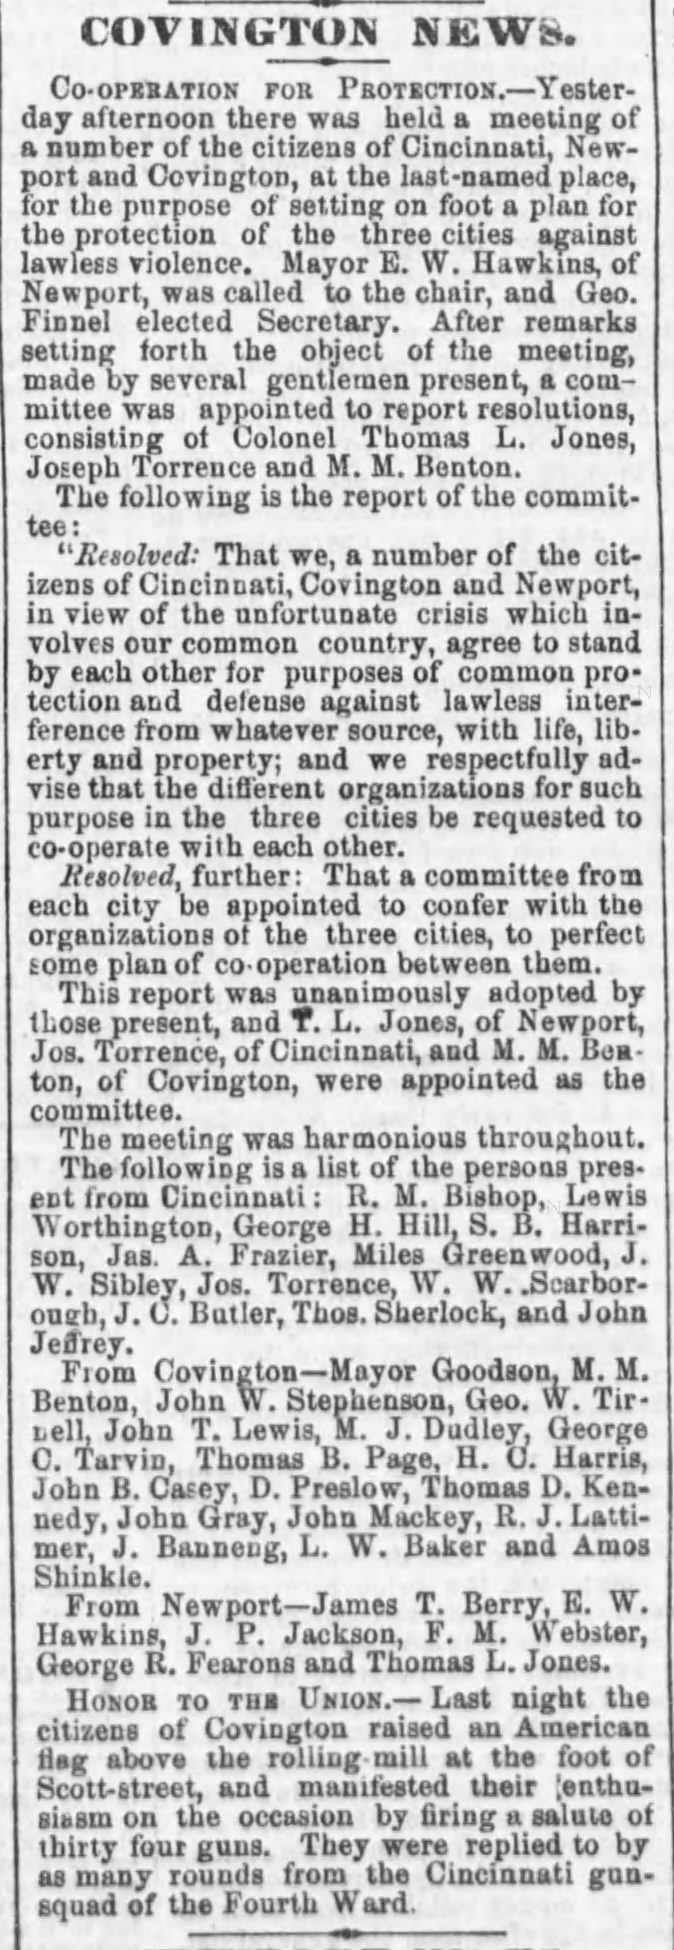 1861 Thomas B Page of Covington was appointed to a safety committee.